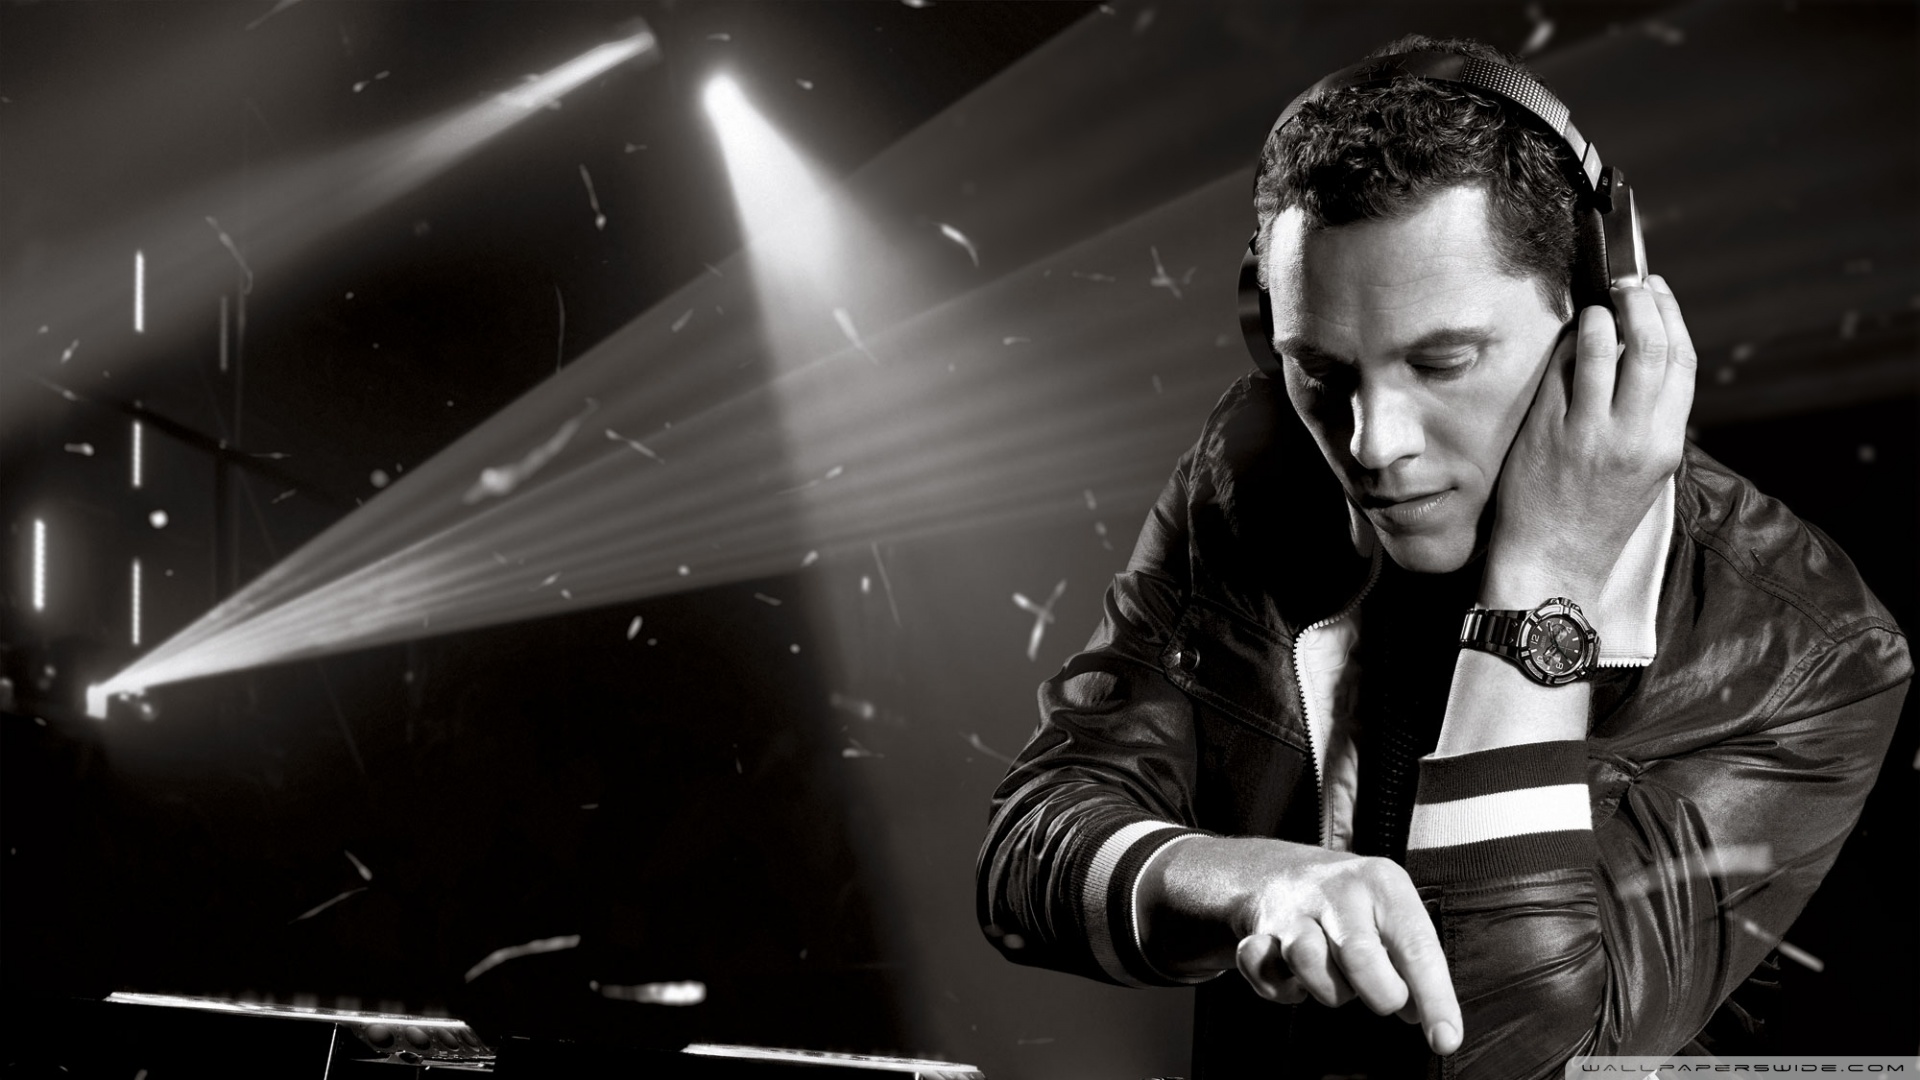 Tiesto is one of the leading names in dance and house music.